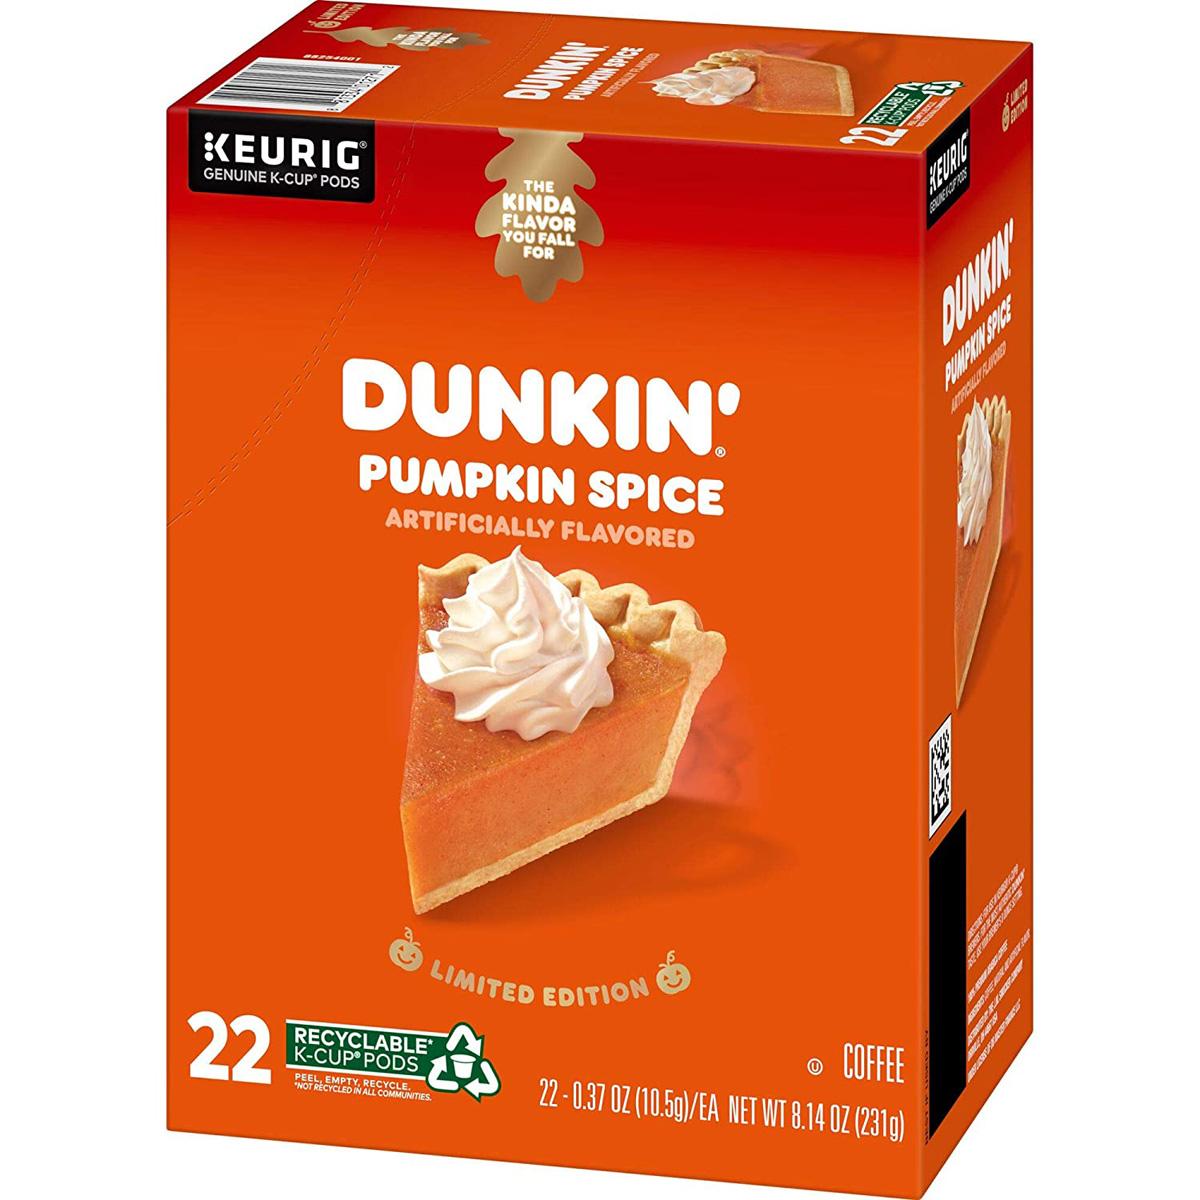 88 Keurig Dunkin Donuts Pumpkin Spice Flavored K-Cup Coffee Pods for $24.98